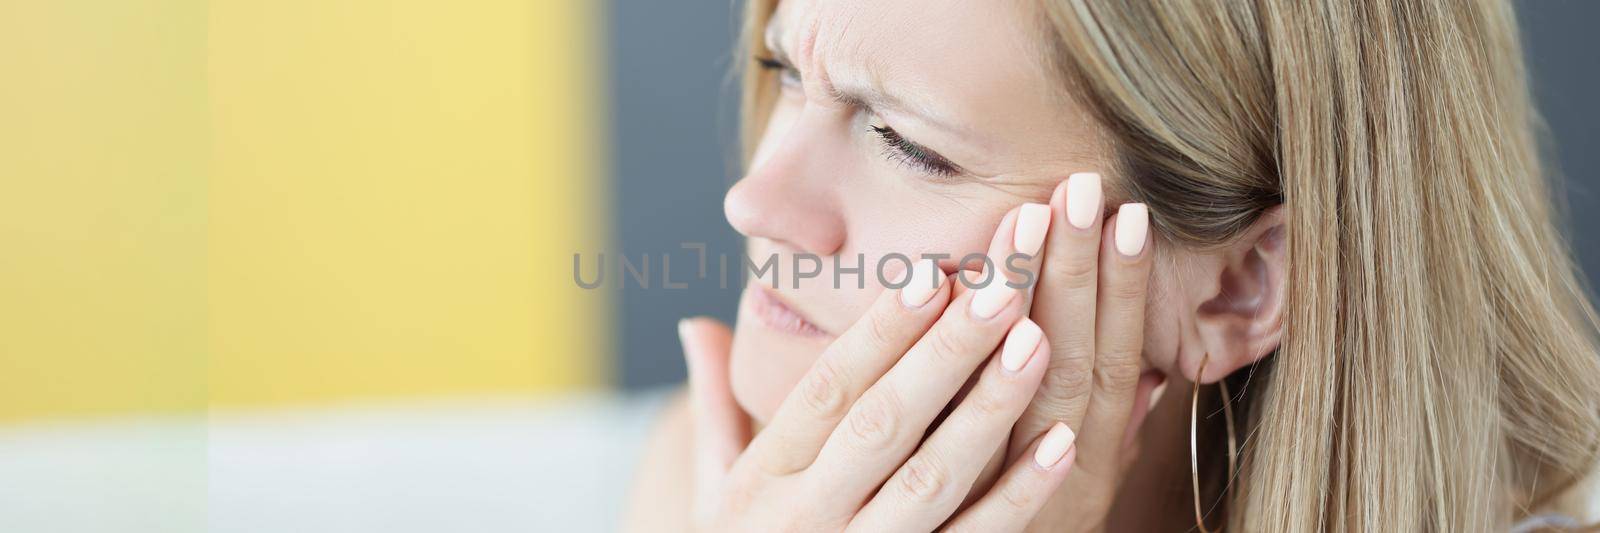 Portrait of beautiful young woman suffering from tooth pain, hold hand near cheek, feeling unwell because of tooth decay or sensitivity. Dental problem, healthcare, toothache concept